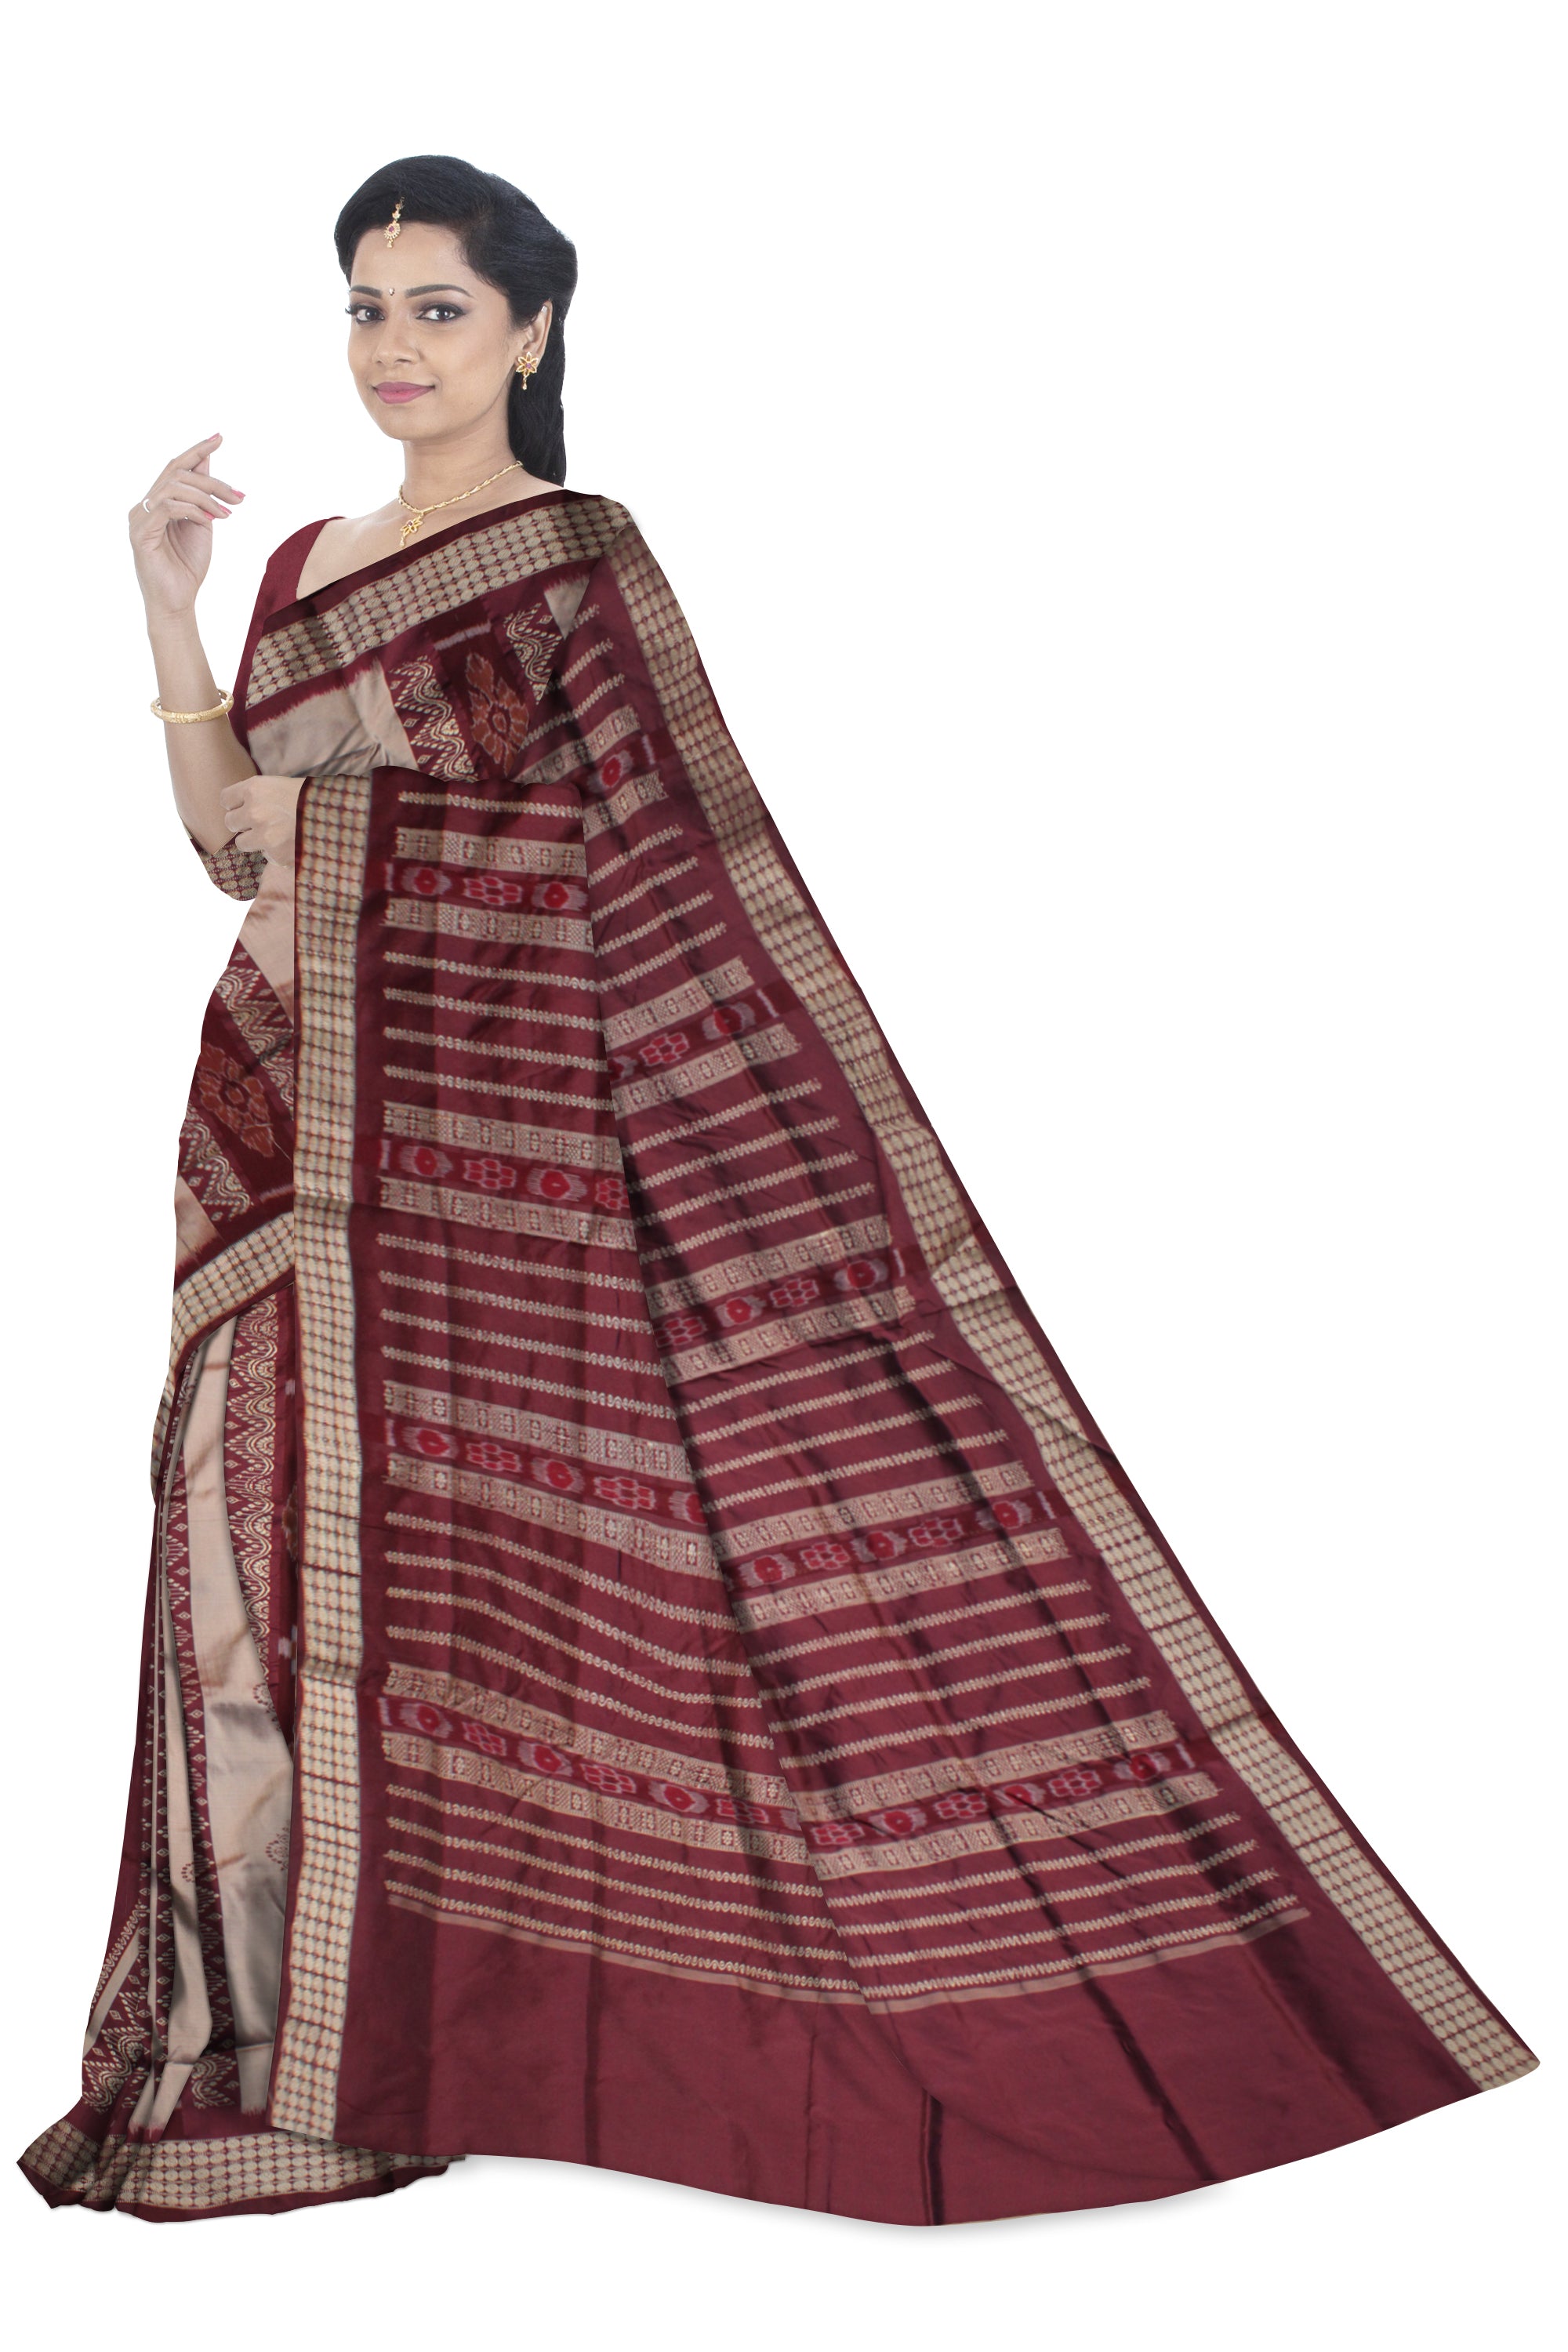 TRADITIONAL PASAPALI WITH BOMKEI PATTERN PATLI PATA SAREE IS SILVER AND COFFEE COLOR BASE,AVAILABLE WITH MATCHING BLOUSE PIECE. - Koshali Arts & Crafts Enterprise